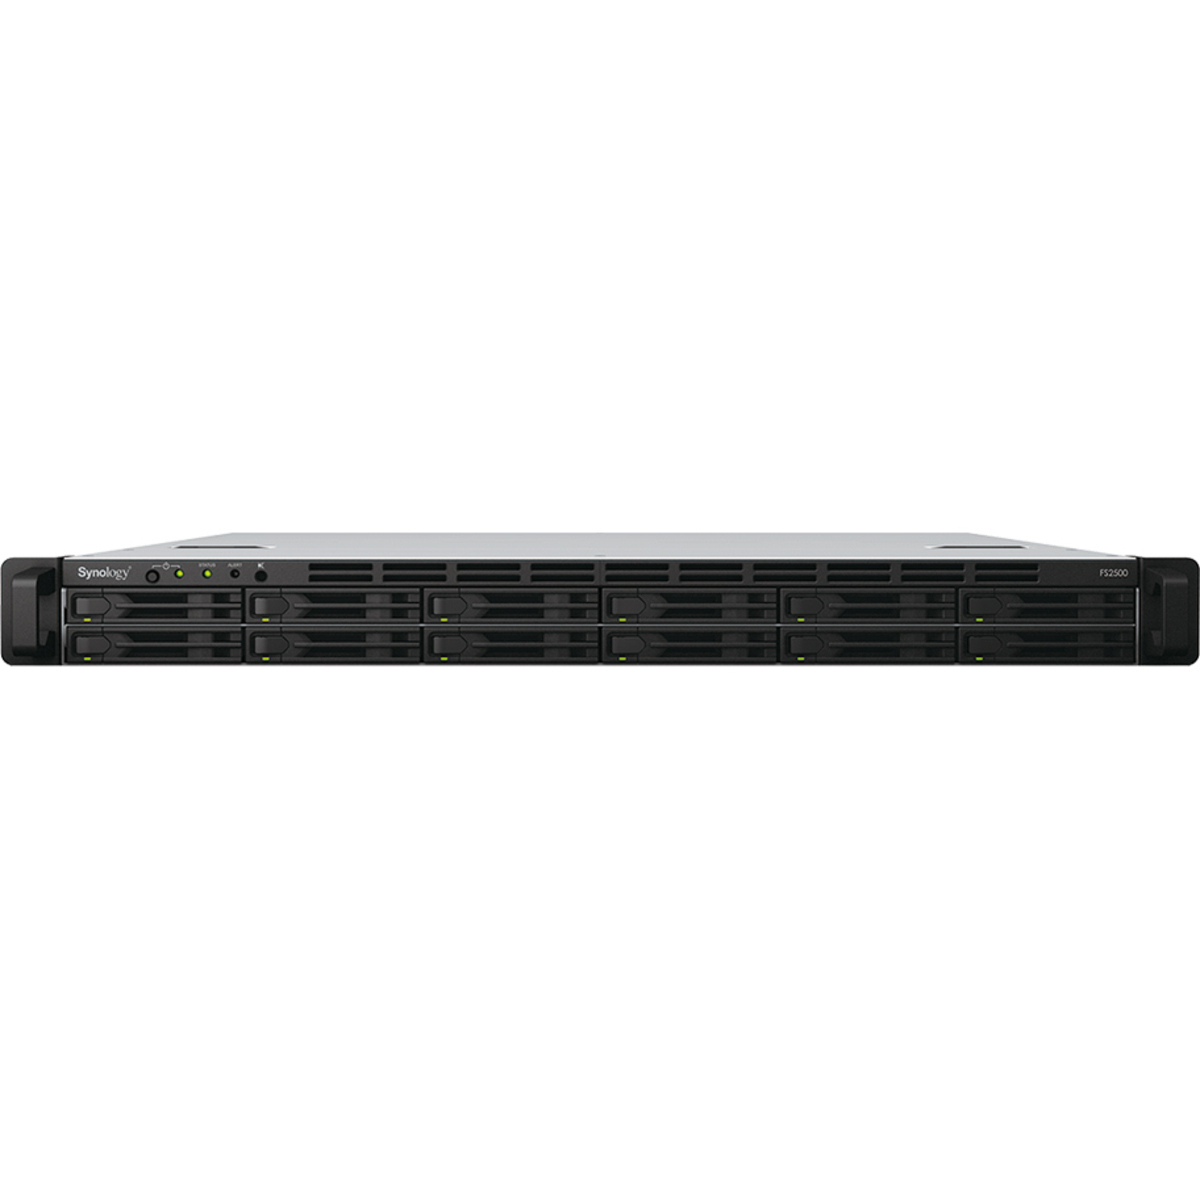 Synology FlashStation FS2500 9.6tb 12-Bay RackMount Large Business / Enterprise NAS - Network Attached Storage Device 10x960gb Synology SAT5210 Series SAT5210-960G 2.5 530/500MB/s SATA 6Gb/s SSD ENTERPRISE Class Drives Installed - Burn-In Tested - FREE RAM UPGRADE FlashStation FS2500